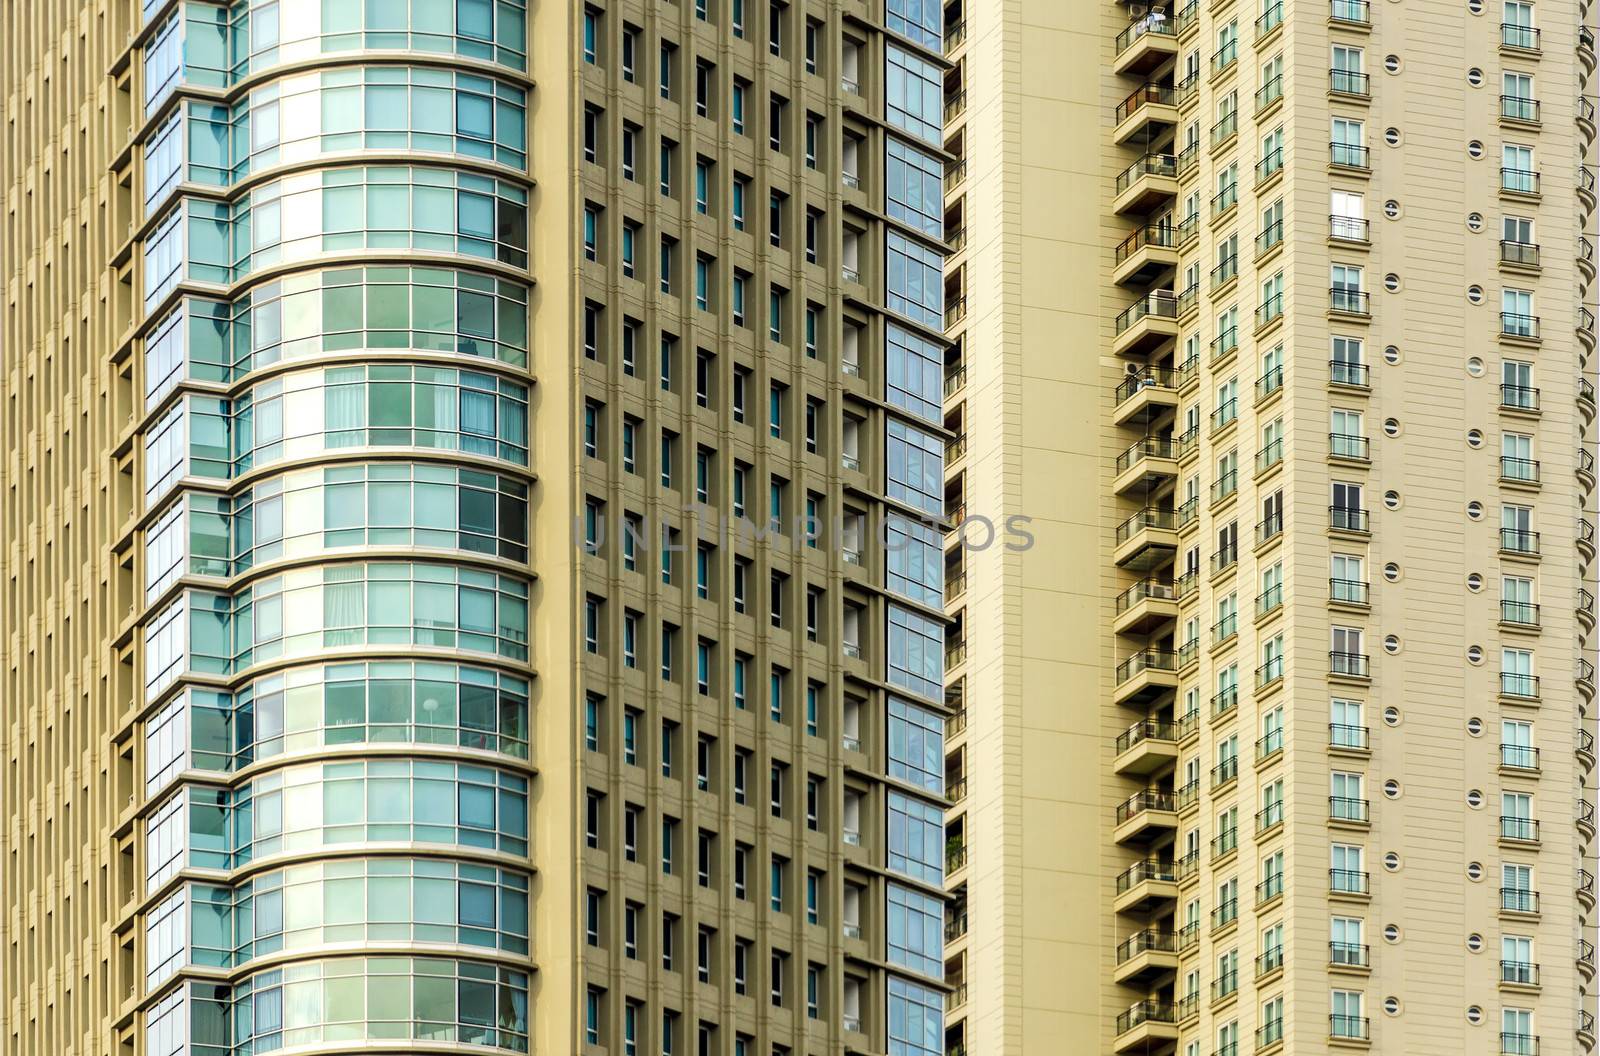 Closeup view of upscale skyscraper apartment buildings the Puerto Madero neighborhood of Buenos Aires